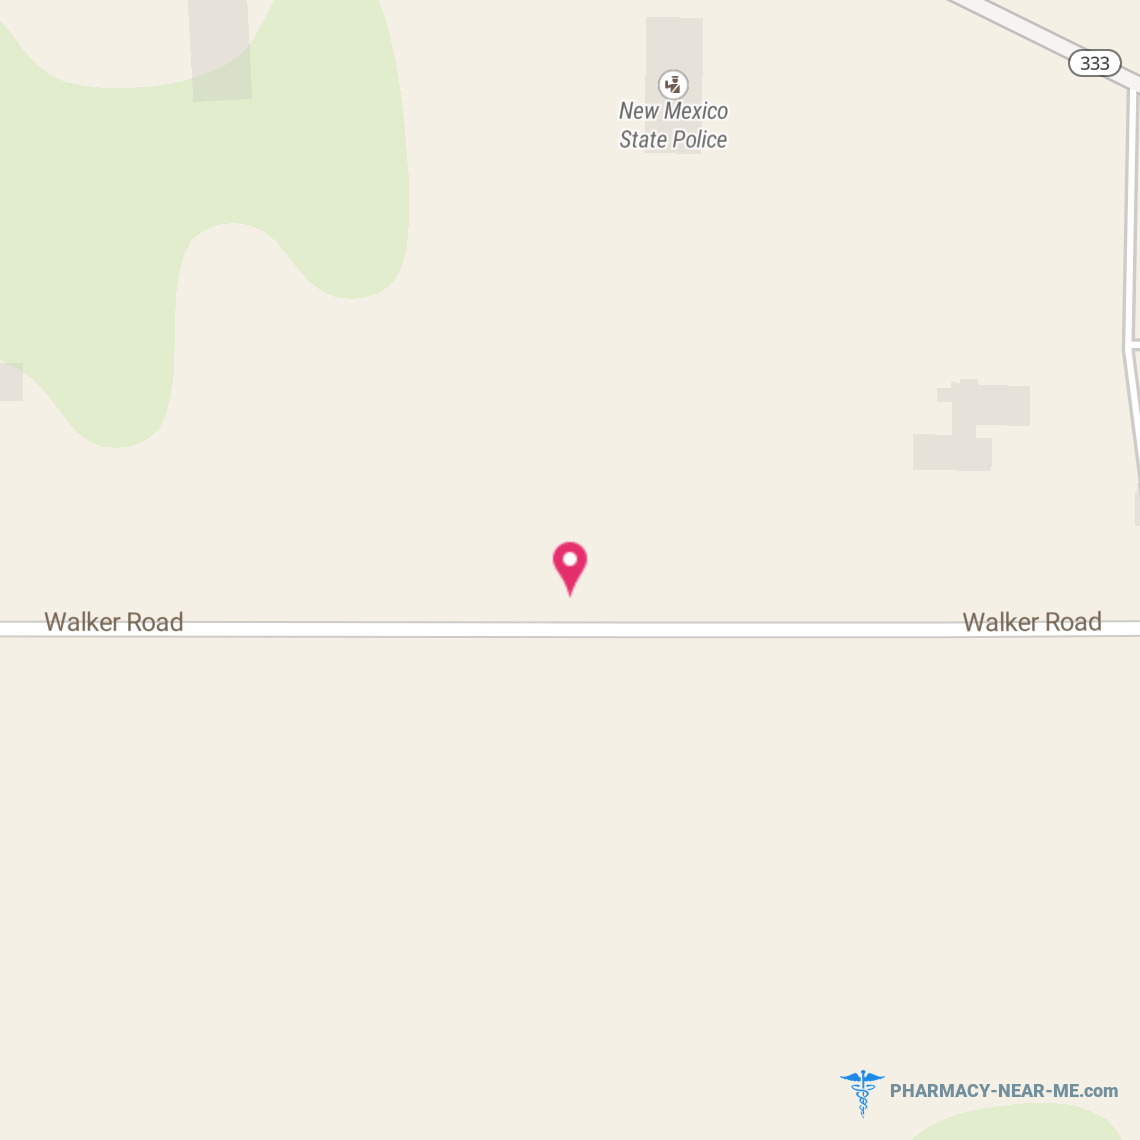 WALGREENS #07881 - Pharmacy Hours, Phone, Reviews & Information: 5 Walker Road, Edgewood, New Mexico 87015, United States